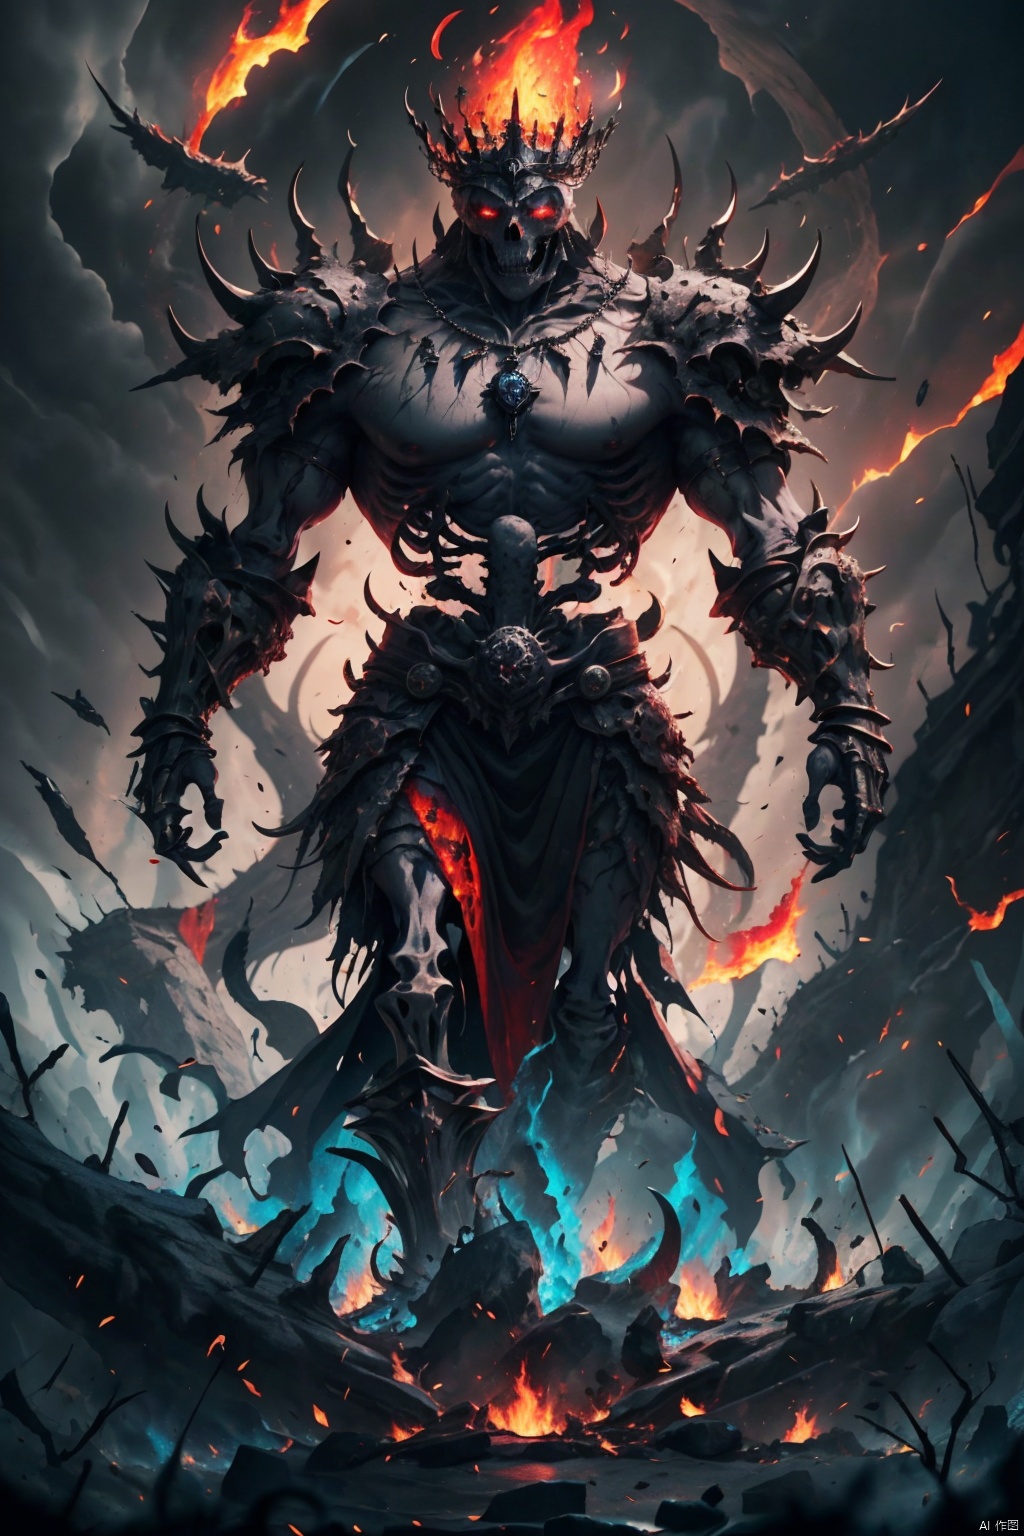  Masterpiece, high detail, 8K, high-definition, Skeleton King, muscular lines, prominent skeletal structure, black armor composed of bones and metal, raised spikes and notches, huge battle axe decorated with bones and metal, burning red eyes, adorned with pendants and necklaces, crown set with precious gemstones, surrounded by special effects of burning flames and dark energy, cinematic lighting, depth of field, overall in red and black tones, with eye-catching yellow accents

